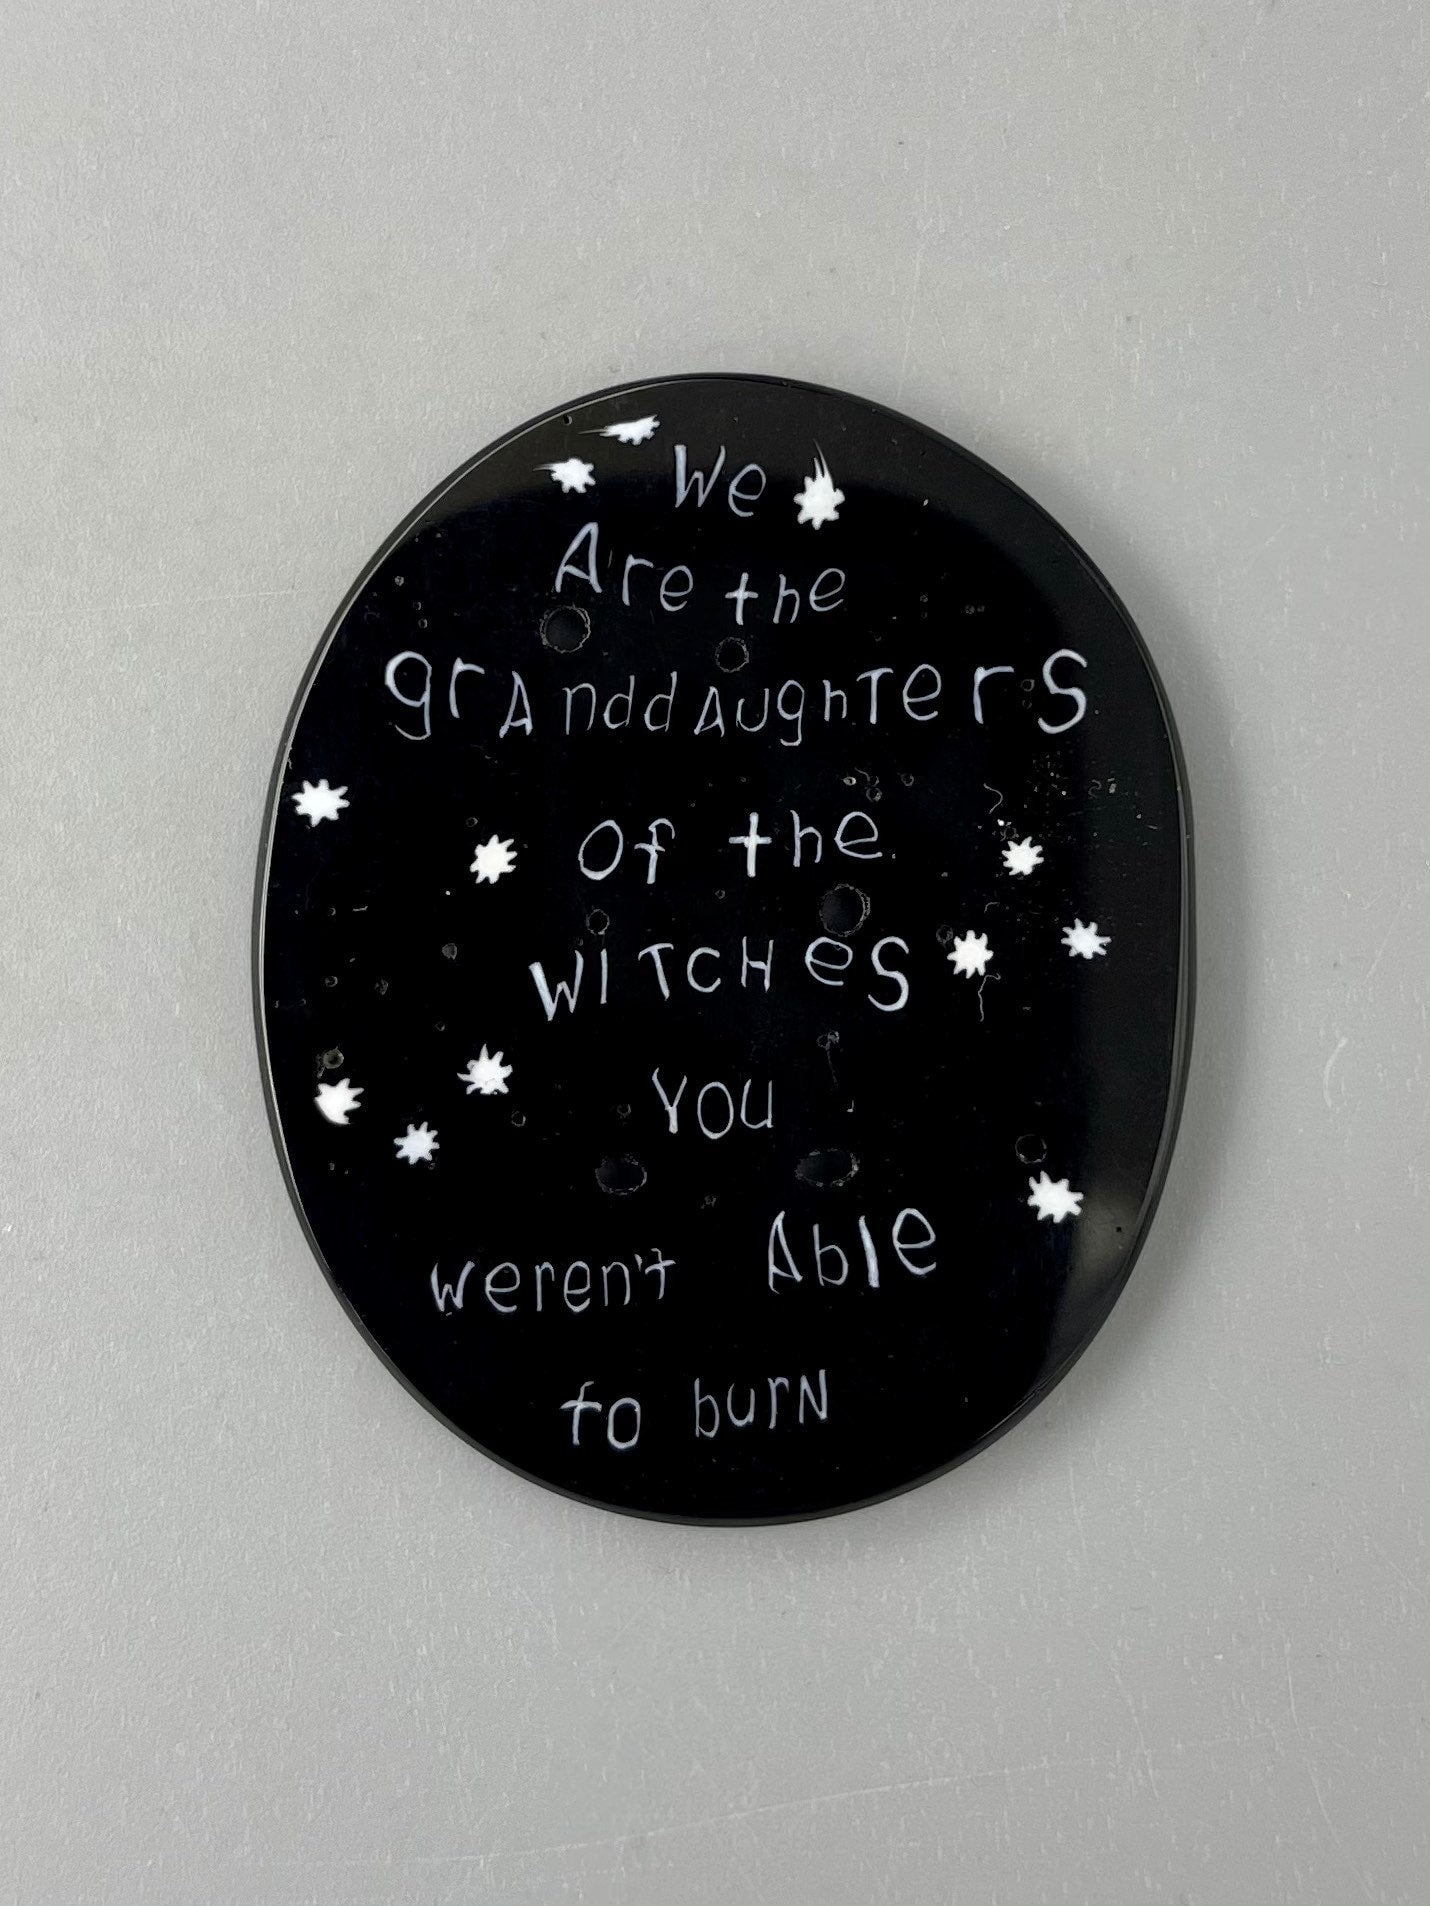 Granddaughters of Witches 1.75” murrine collectors slice